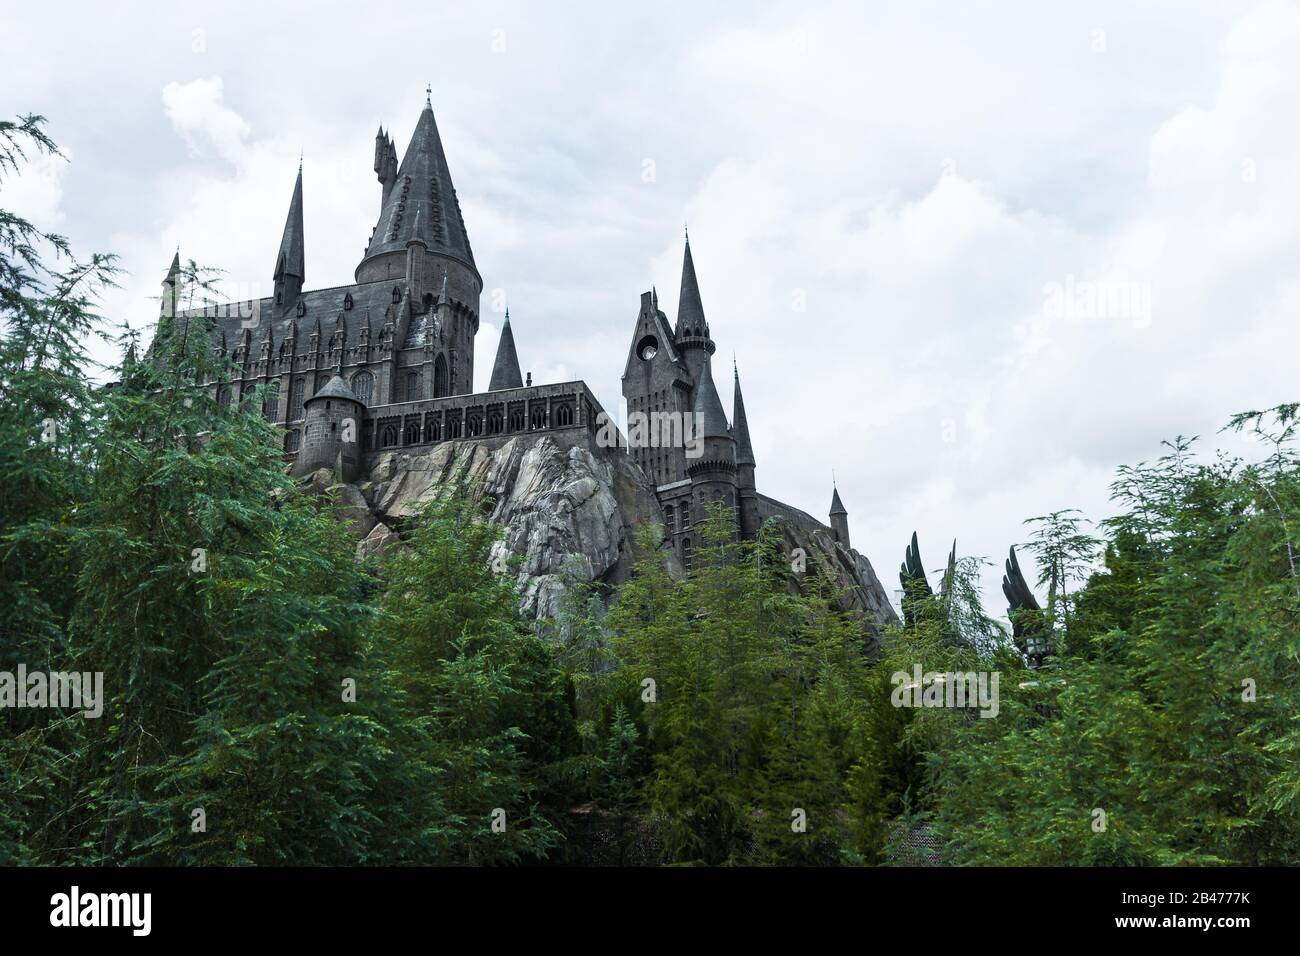 Hogwarts School Of Witchcraft And Wizardry, Universal Studios Orlando (The Wizarding World Of Harry Potter), Florida. Bellissimo scatto Foto Stock